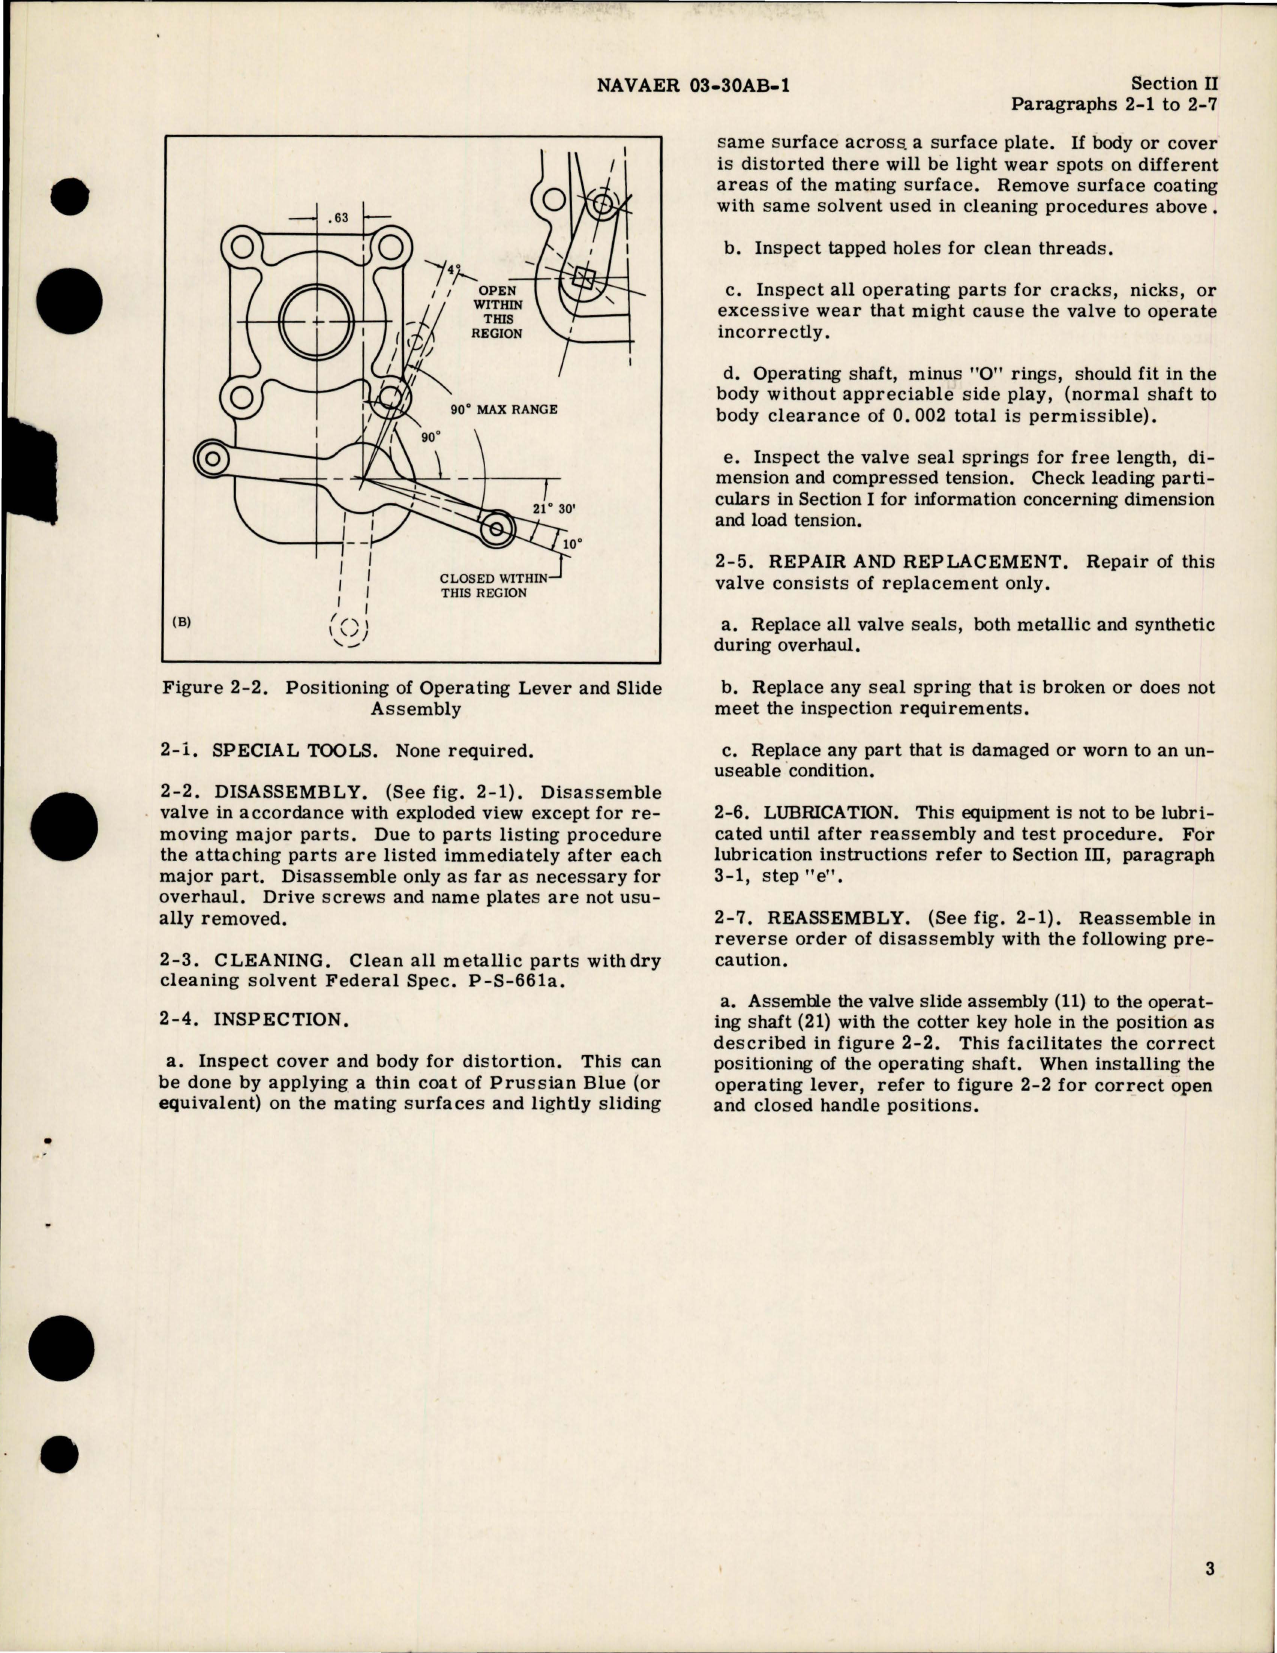 Sample page 5 from AirCorps Library document: Overhaul Instructions for Manual Slide Valve Assemblies